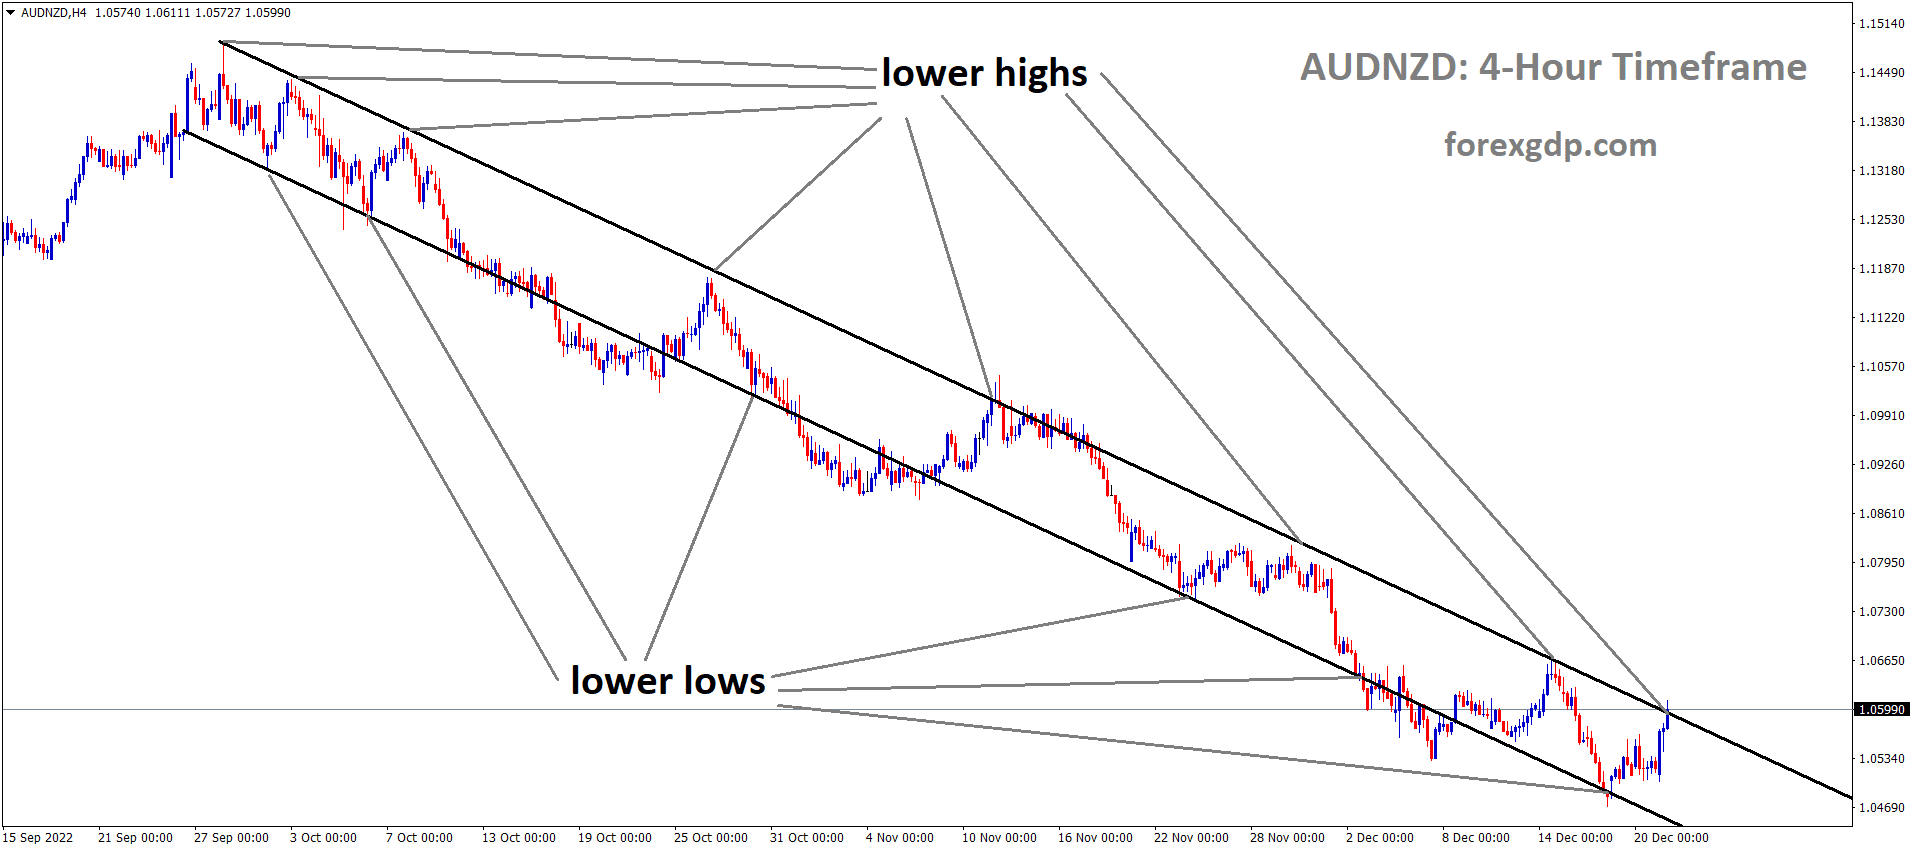 AUDNZD is moving in the Descending channel and the market has reached the lower high area of the channel 4